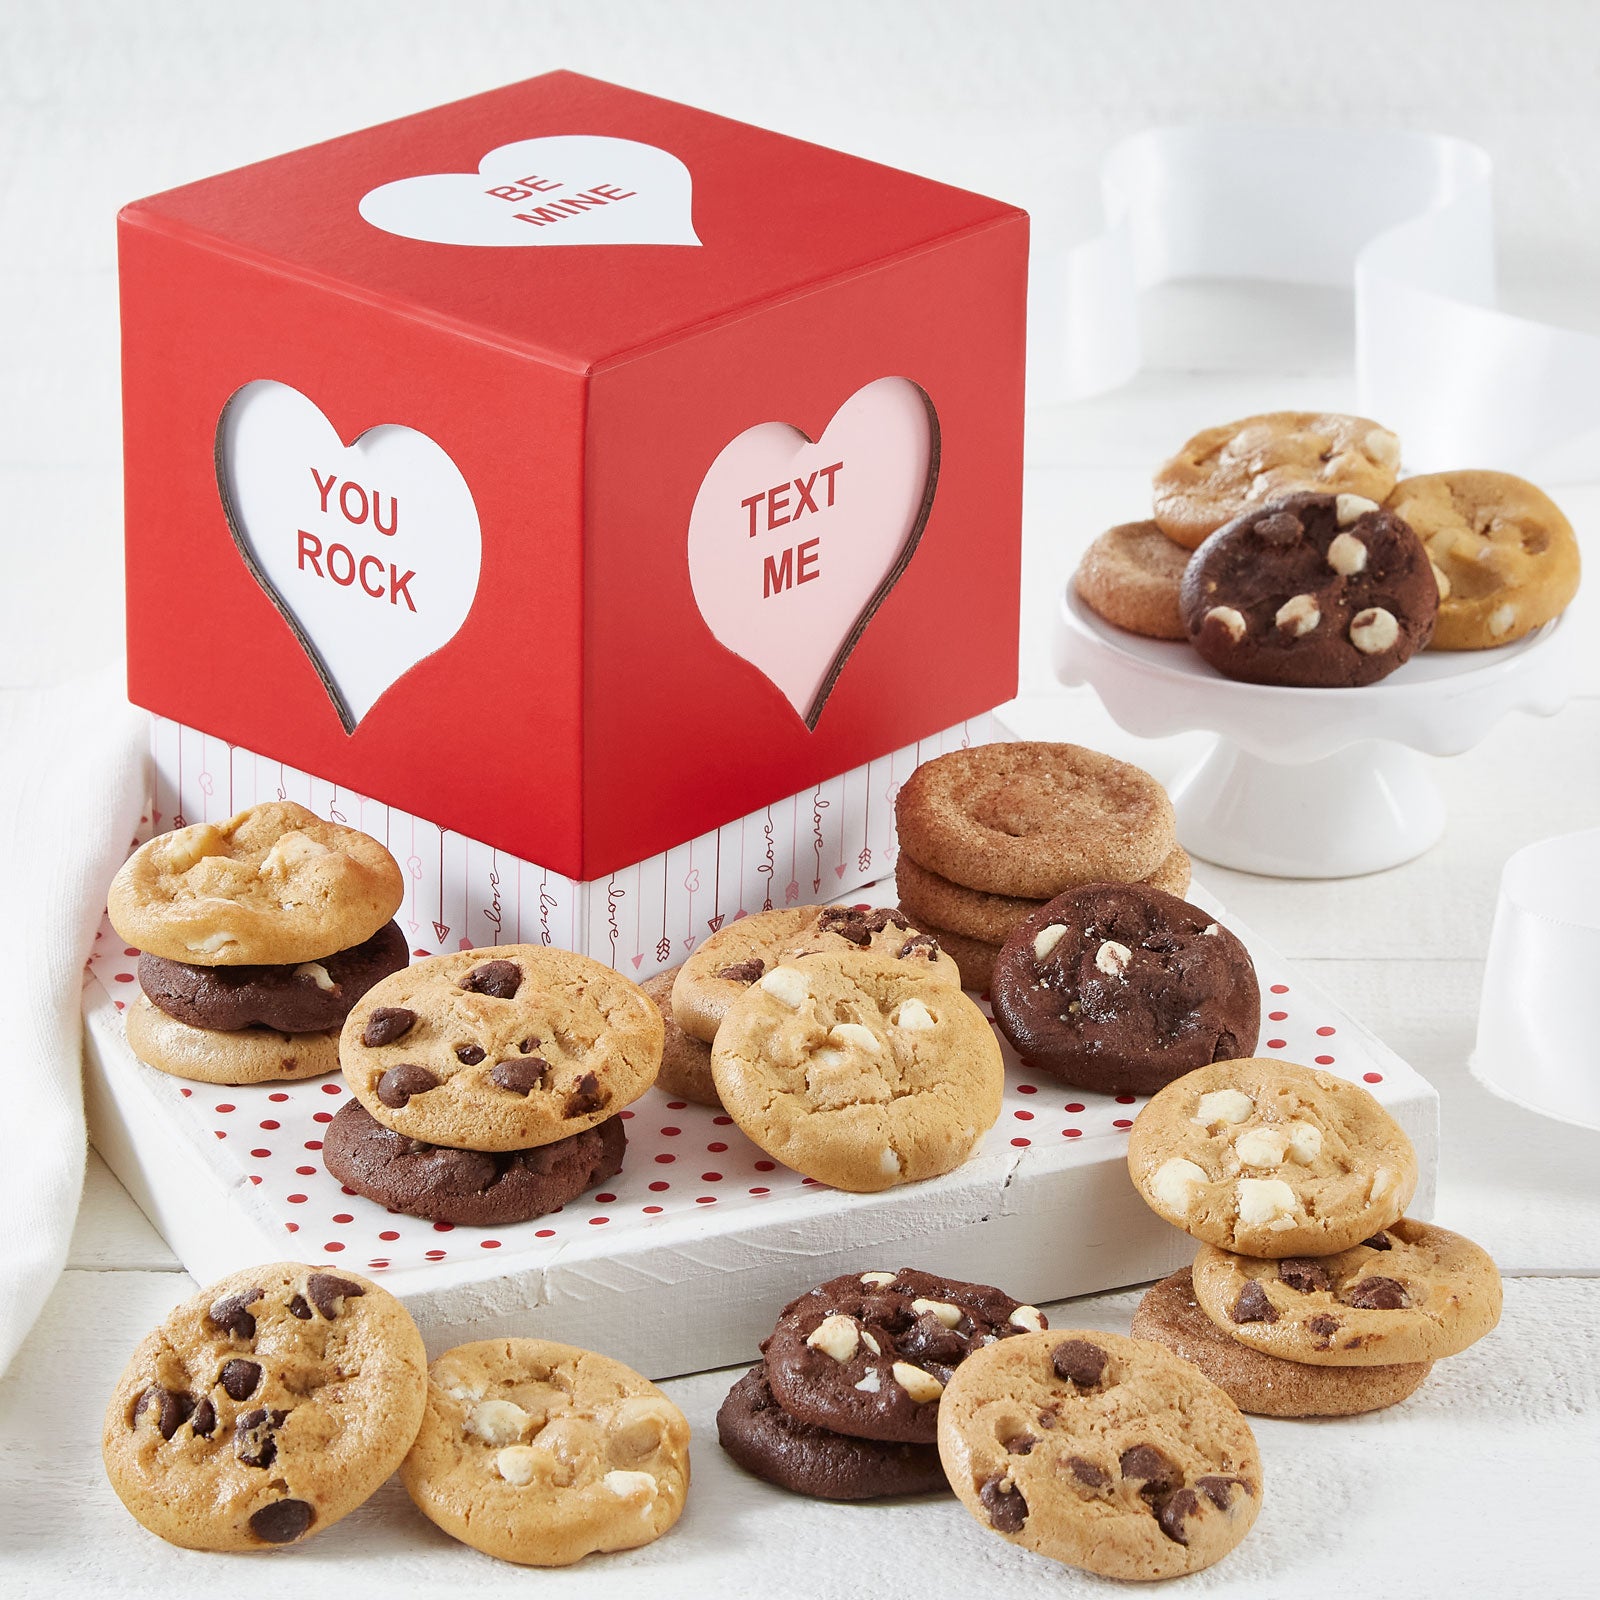 A conversation heart-themed mini gift box filled with an assortment of Nibblers.